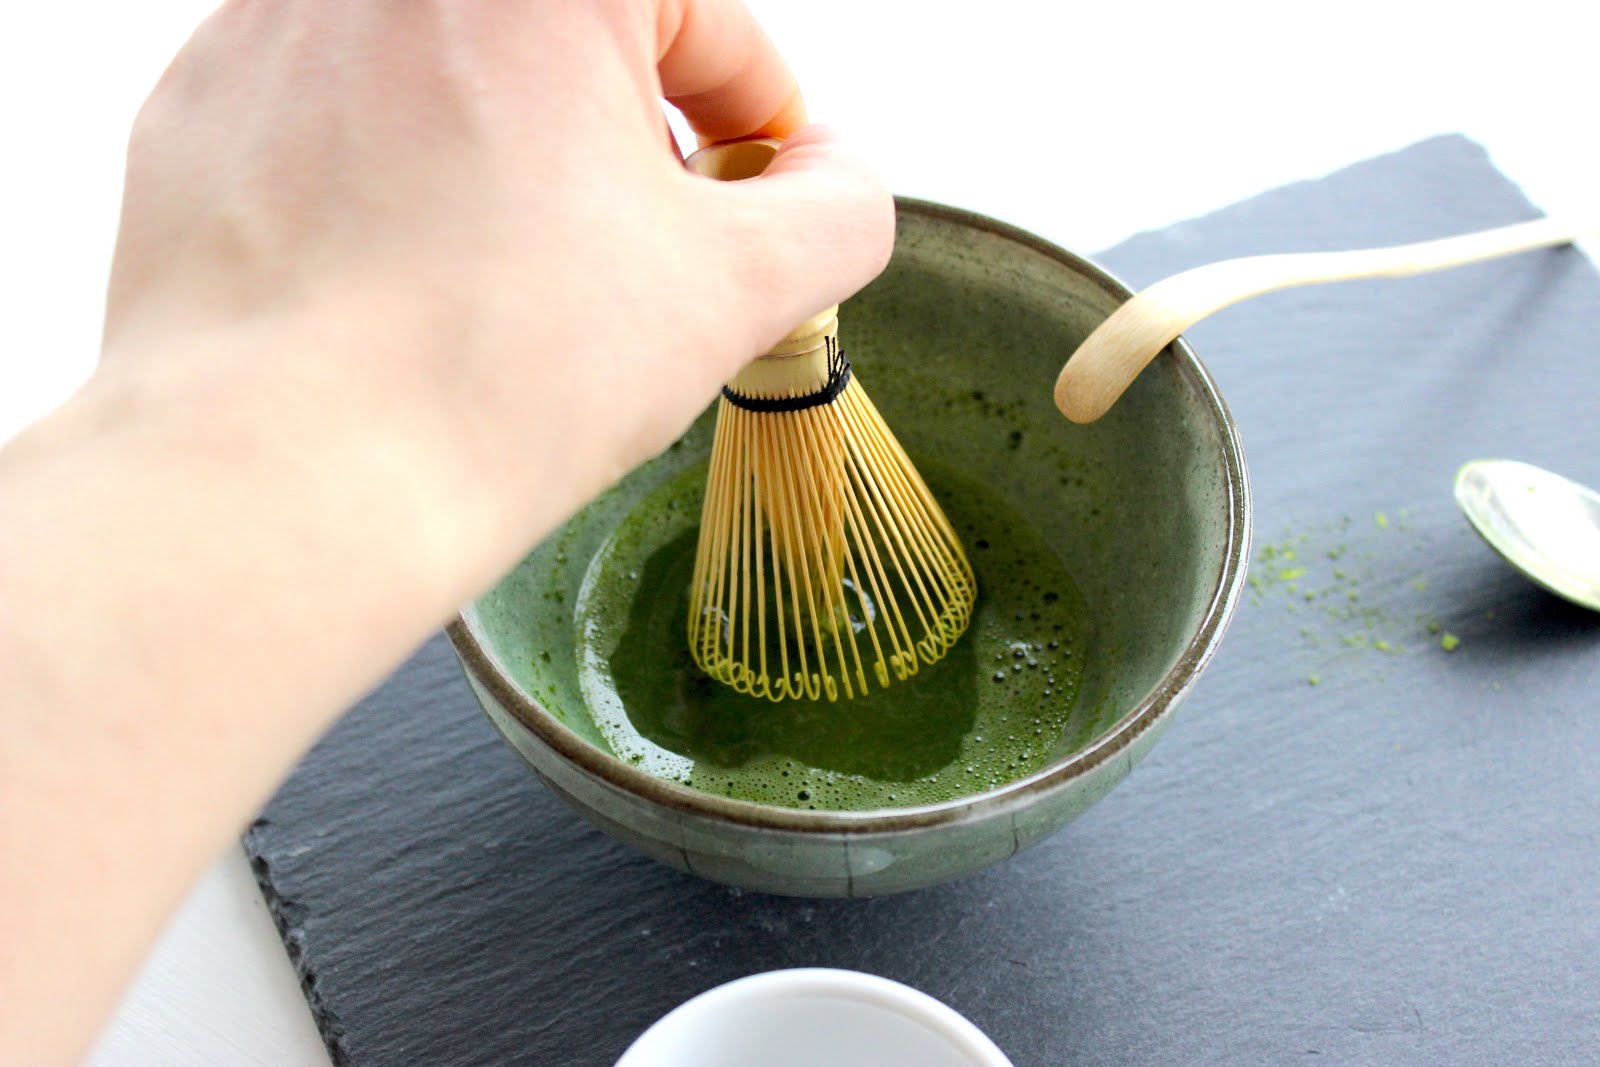 Trying our hand at Matcha Tea.